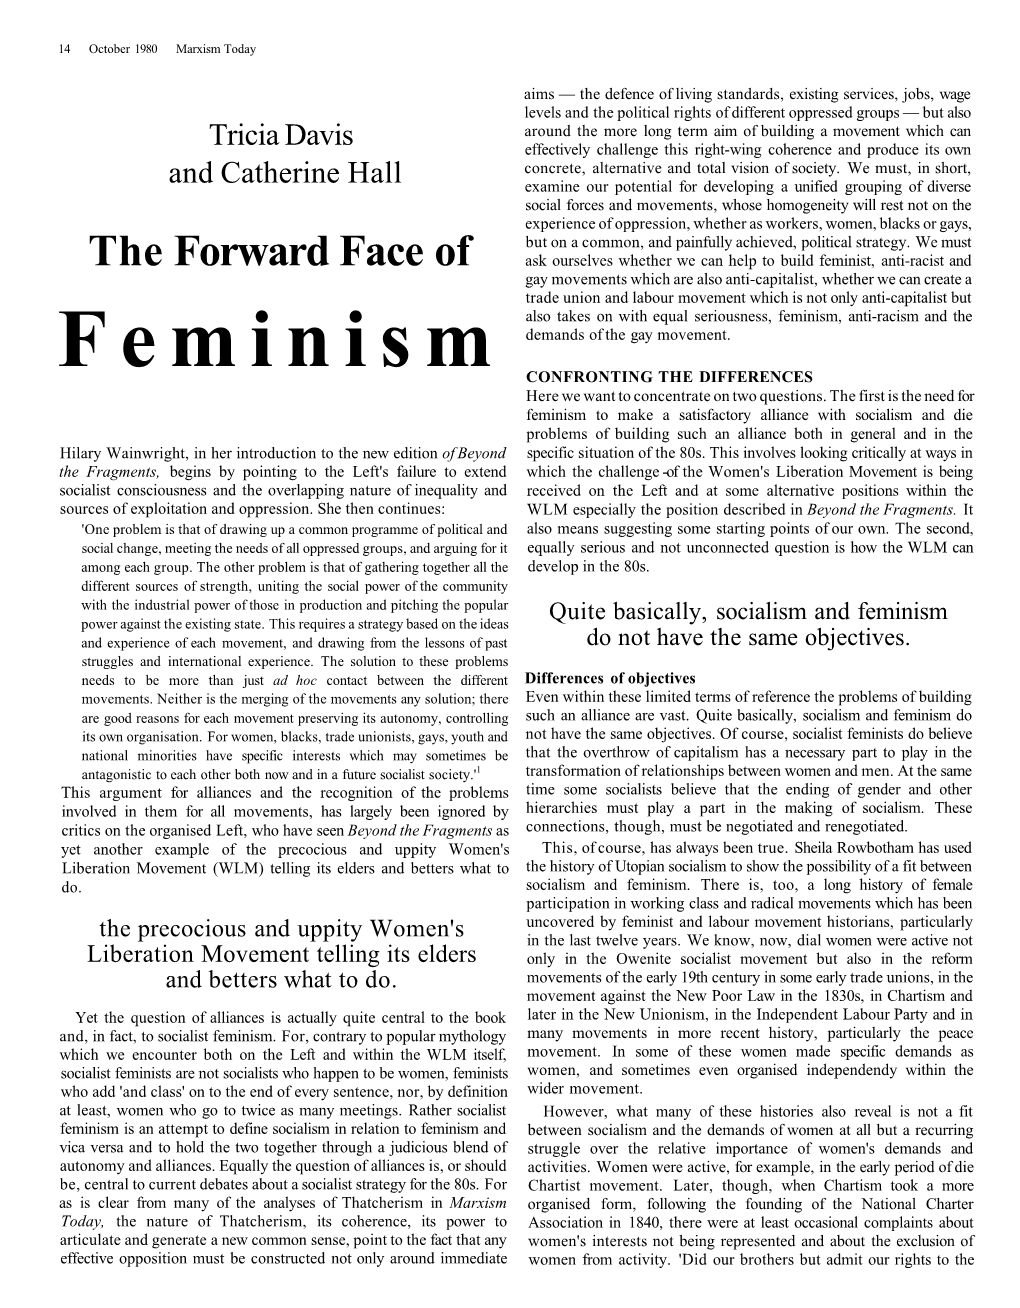 Feminism, Anti-Racism and the Feminism Demands of the Gay Movement